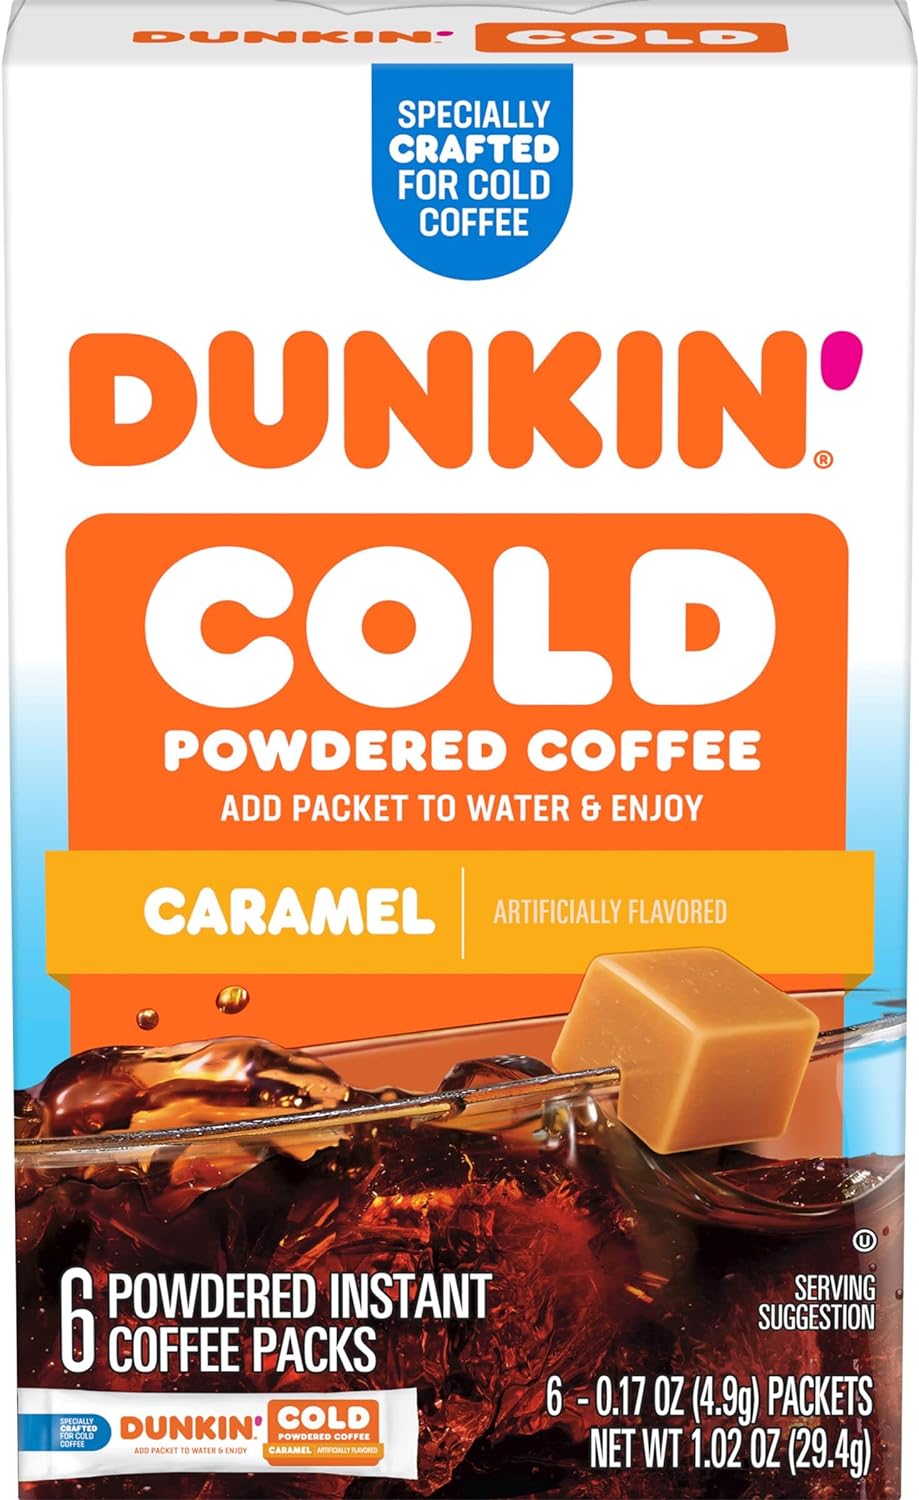 Dunkin' Cold Caramel Flavored Powdered Single Serve Instant Coffee Packs, 6 Count (Pack of 12)